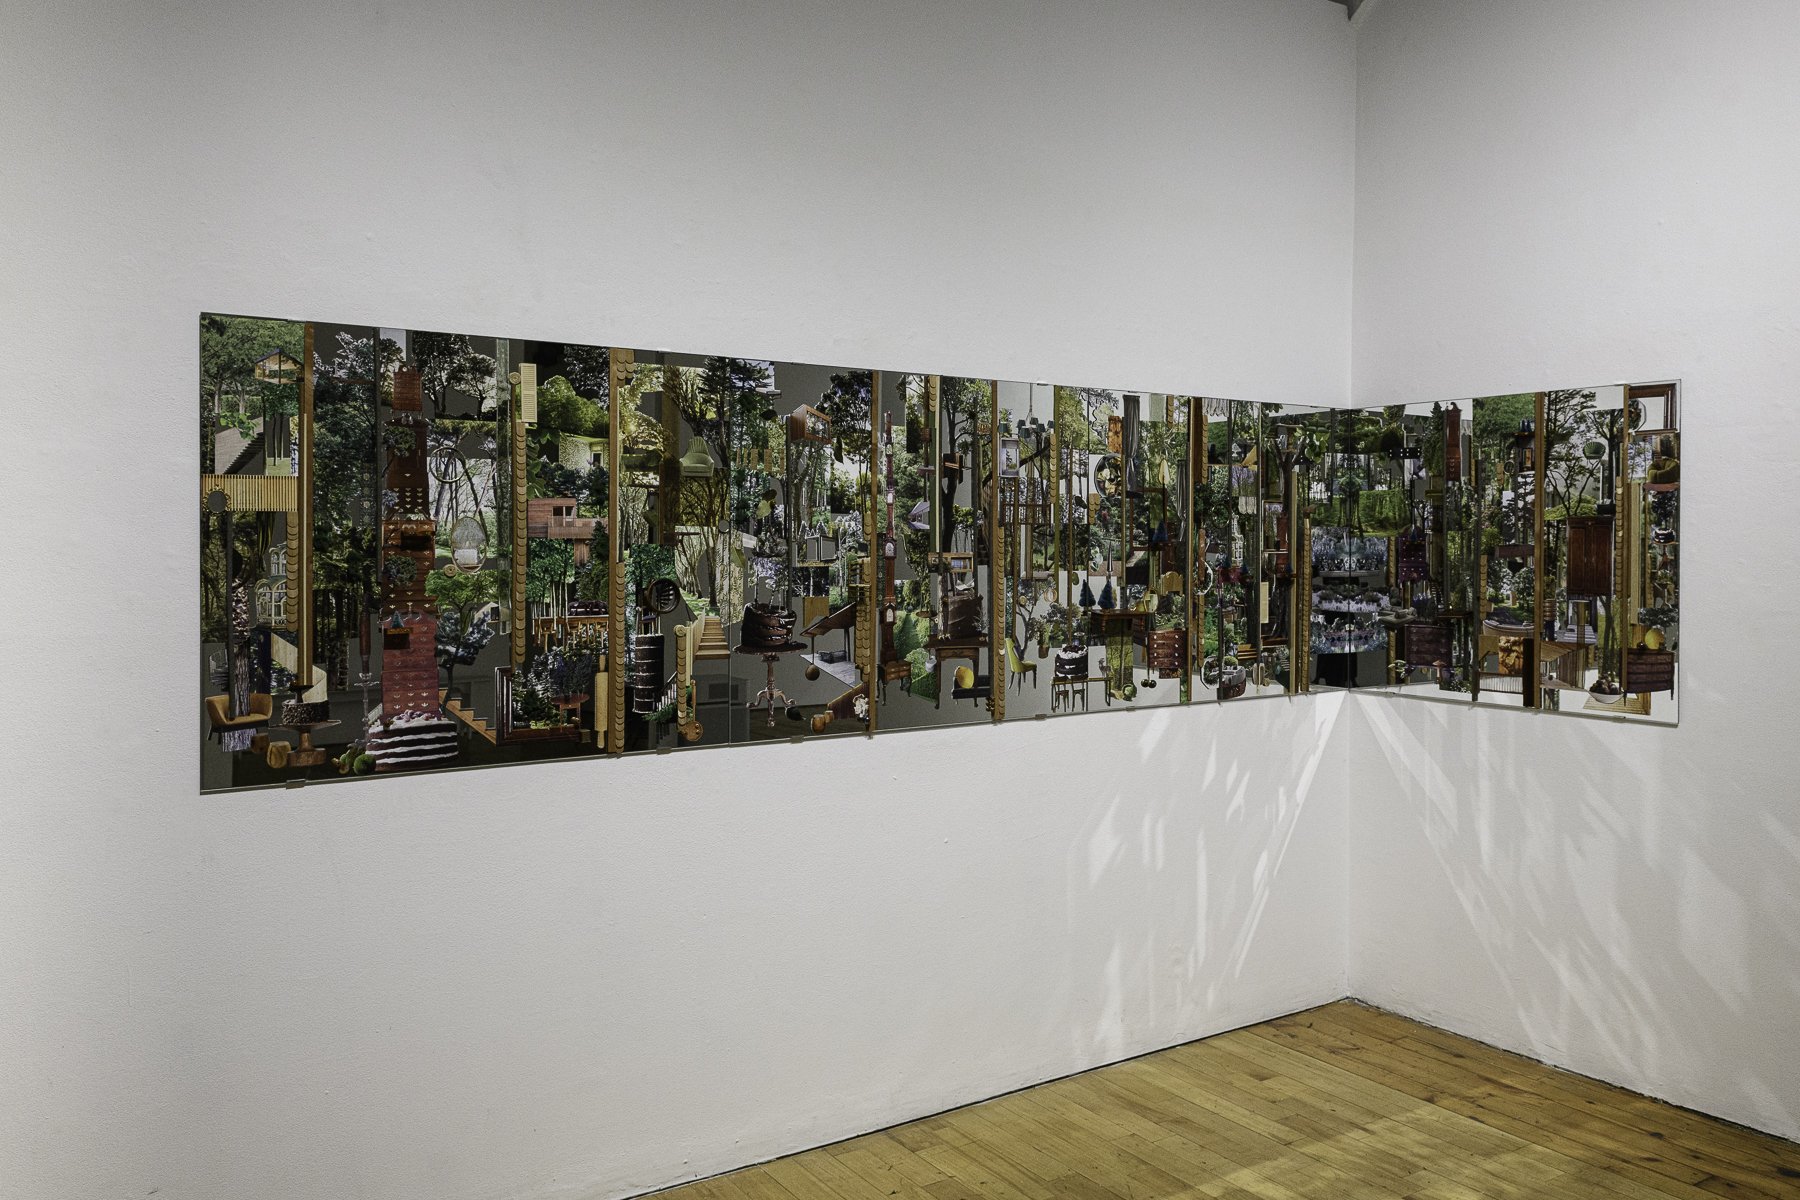  Wood, 2022 Installation view at Red Head Gallery Hand cut collage and mixed media  Picture by Peggy Taylor Reid, 2022 